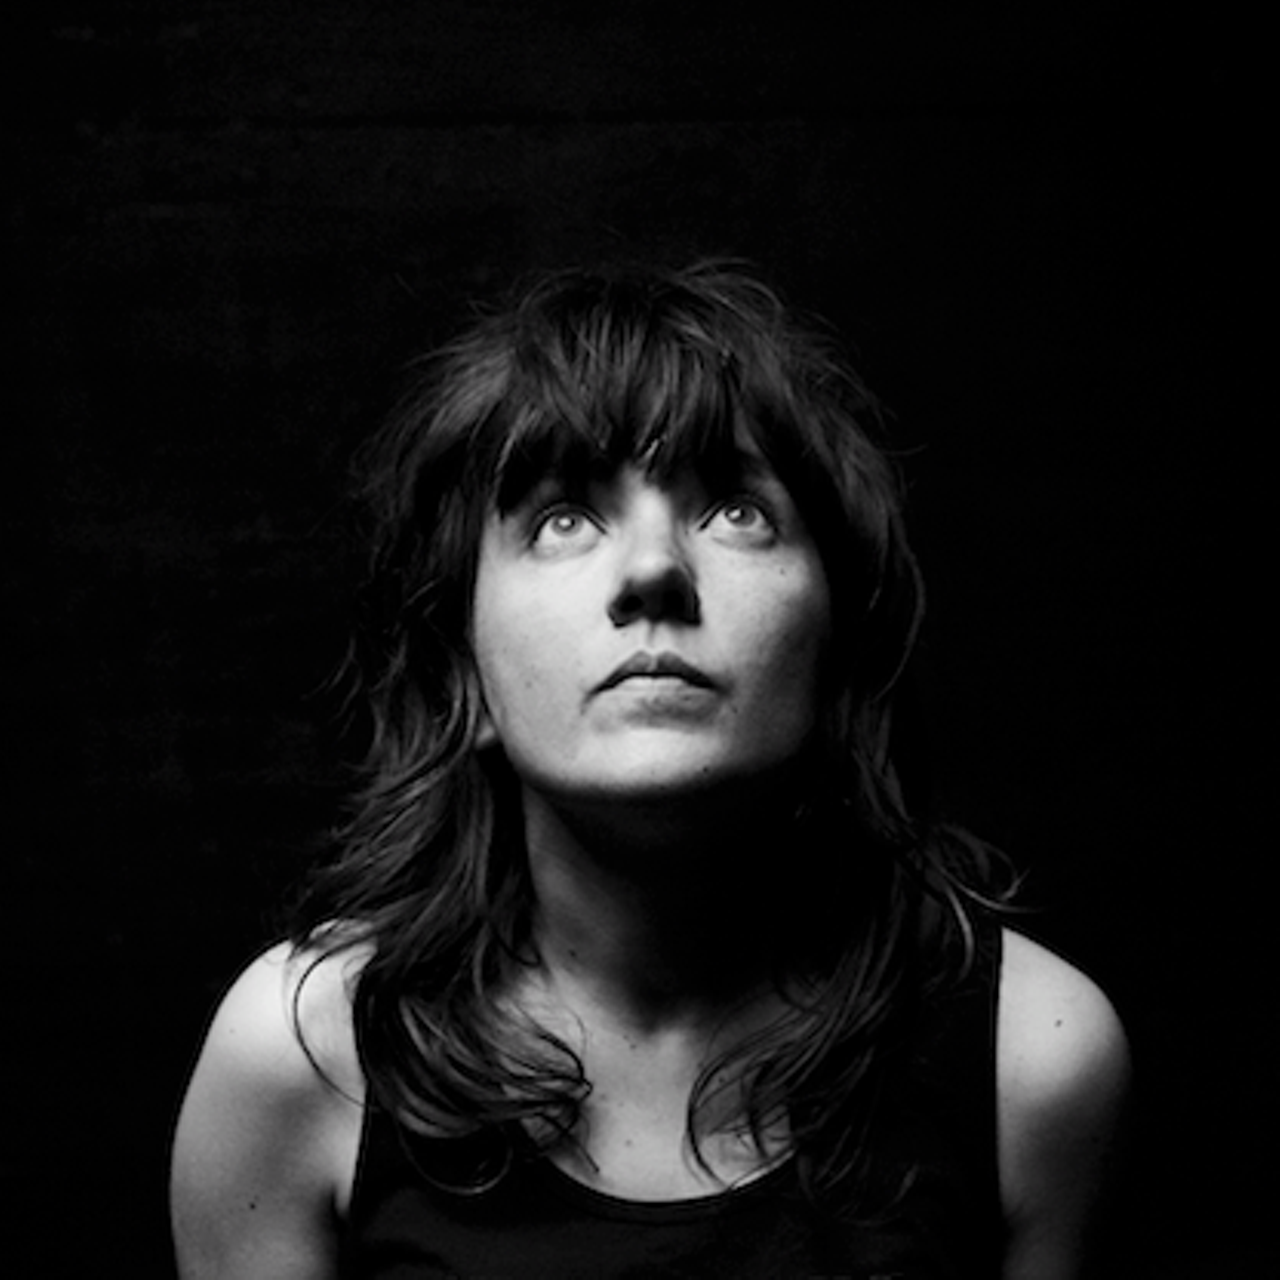 Courtney Barnett
In our humble opinion, this indie rocker from Melbourne, Australia was absolutely robbed at the 2016 Grammy Awards. Barnett was up for Best New Artist after releasing her debut album Sometimes I sit and think, and sometimes I just sit in 2015 to fantastic reviews and acclaims. Barnett's songwriting is just one stream of witty, off-end thoughts that Barnett faces in her daily life, plus she rips on the guitar like Kurt Cobain. 
Essential tracks: &#147;Pedestrian At Best,&#148; &#147;Avant Gardener,&#148; and &#147;Depreston.&#148;